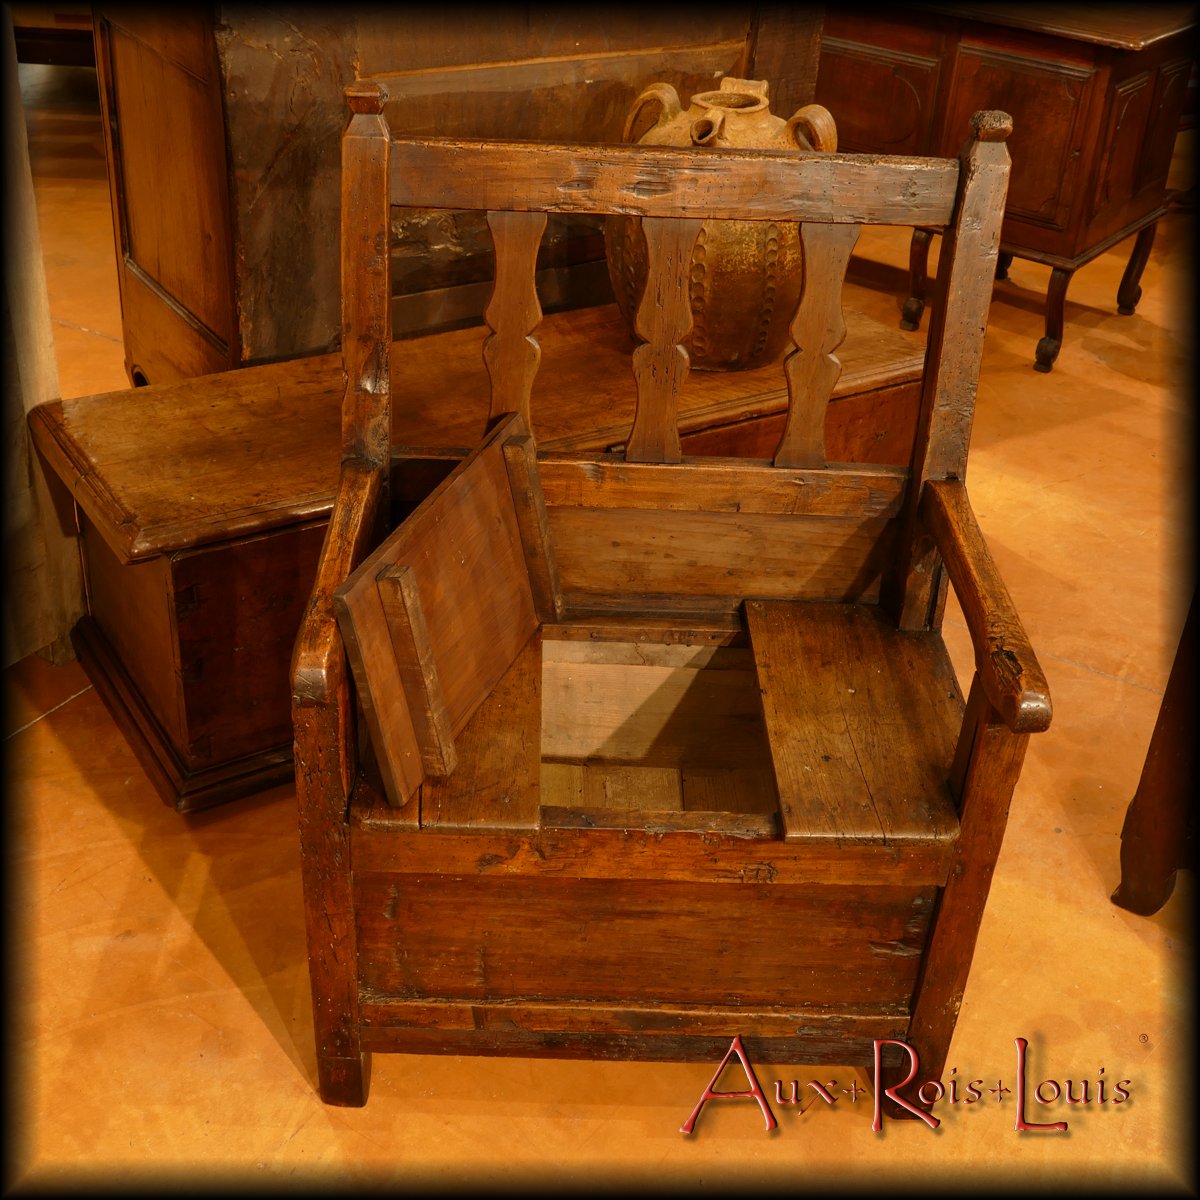 Armchair also called "cantou" in the trunk of which the salt was stored, kept warm and dry.